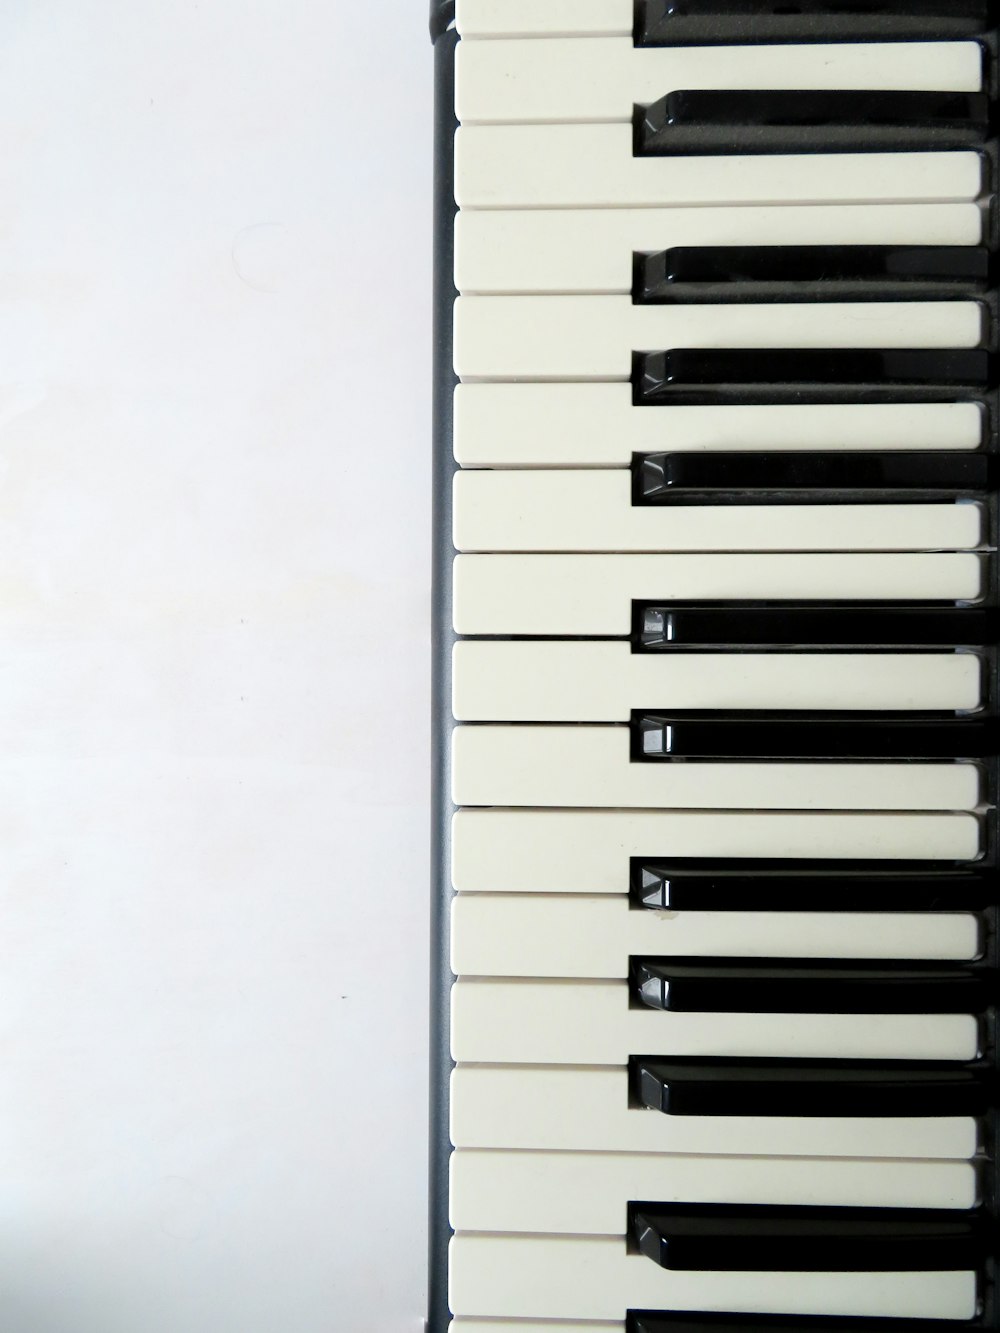 Piano Pictures Download Free Images Stock Photos On Unsplash